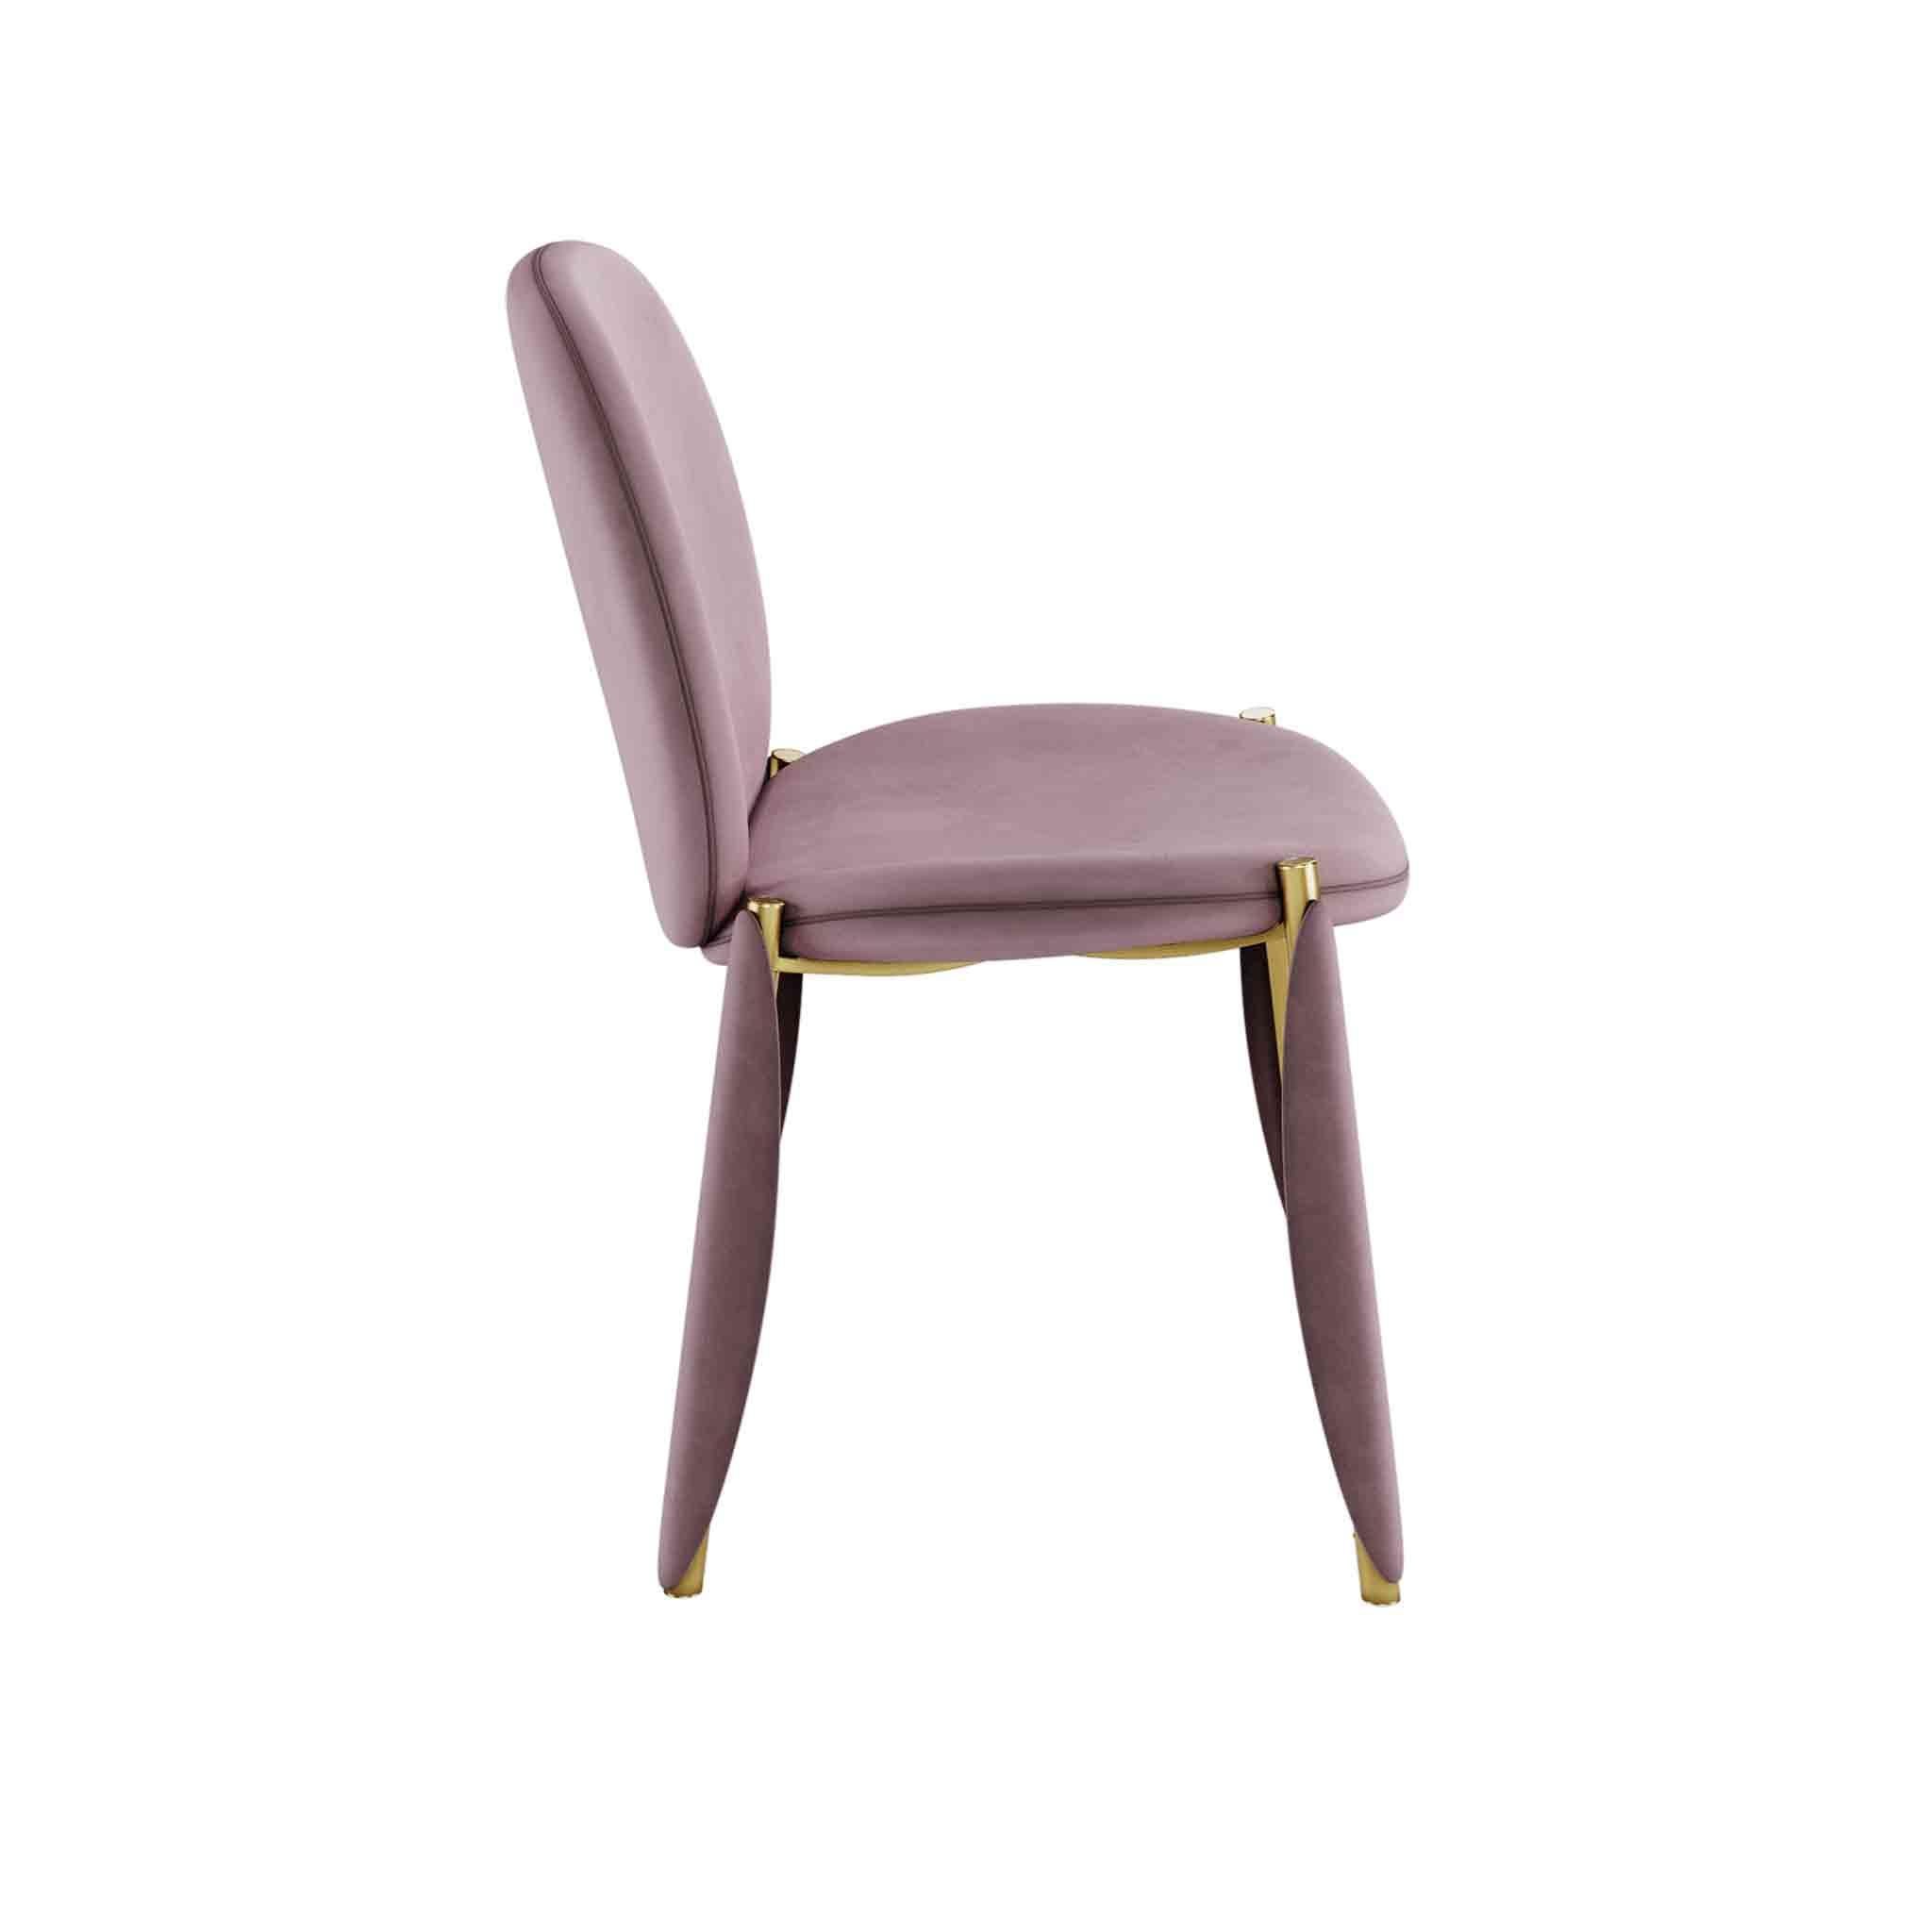 Mantis chair is a luxurious dining chair expressed by a combination of unique materials. A modern dining chair is a perfect option for a modern or classic dining room design.

Materials: Upholstered in Velvet; Structure in Polished